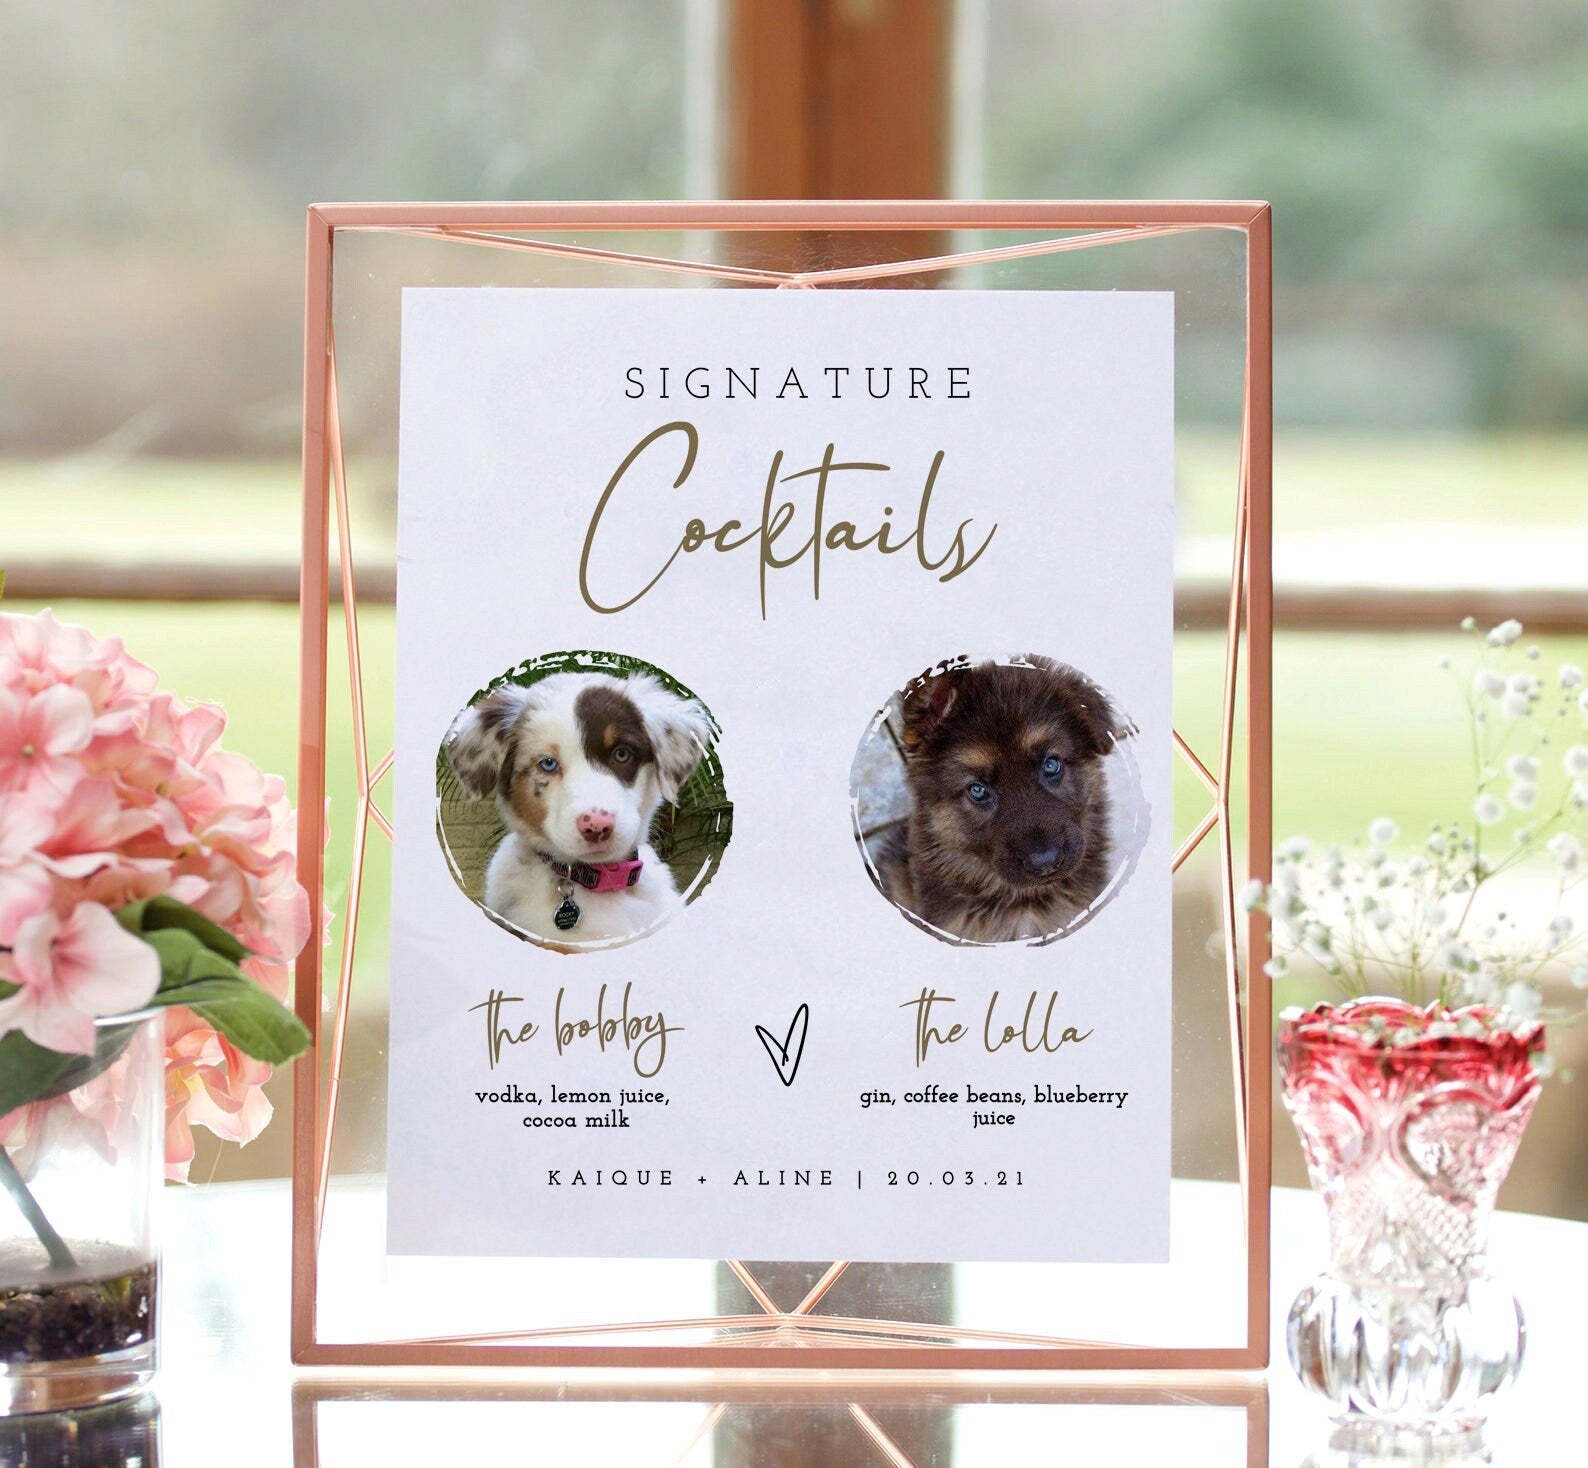 Helena | Dog Signature Drink Sign Template, Dog Signature Cocktail Signs Instant Download, Pet Printable Signature Drink Sign For Wedding